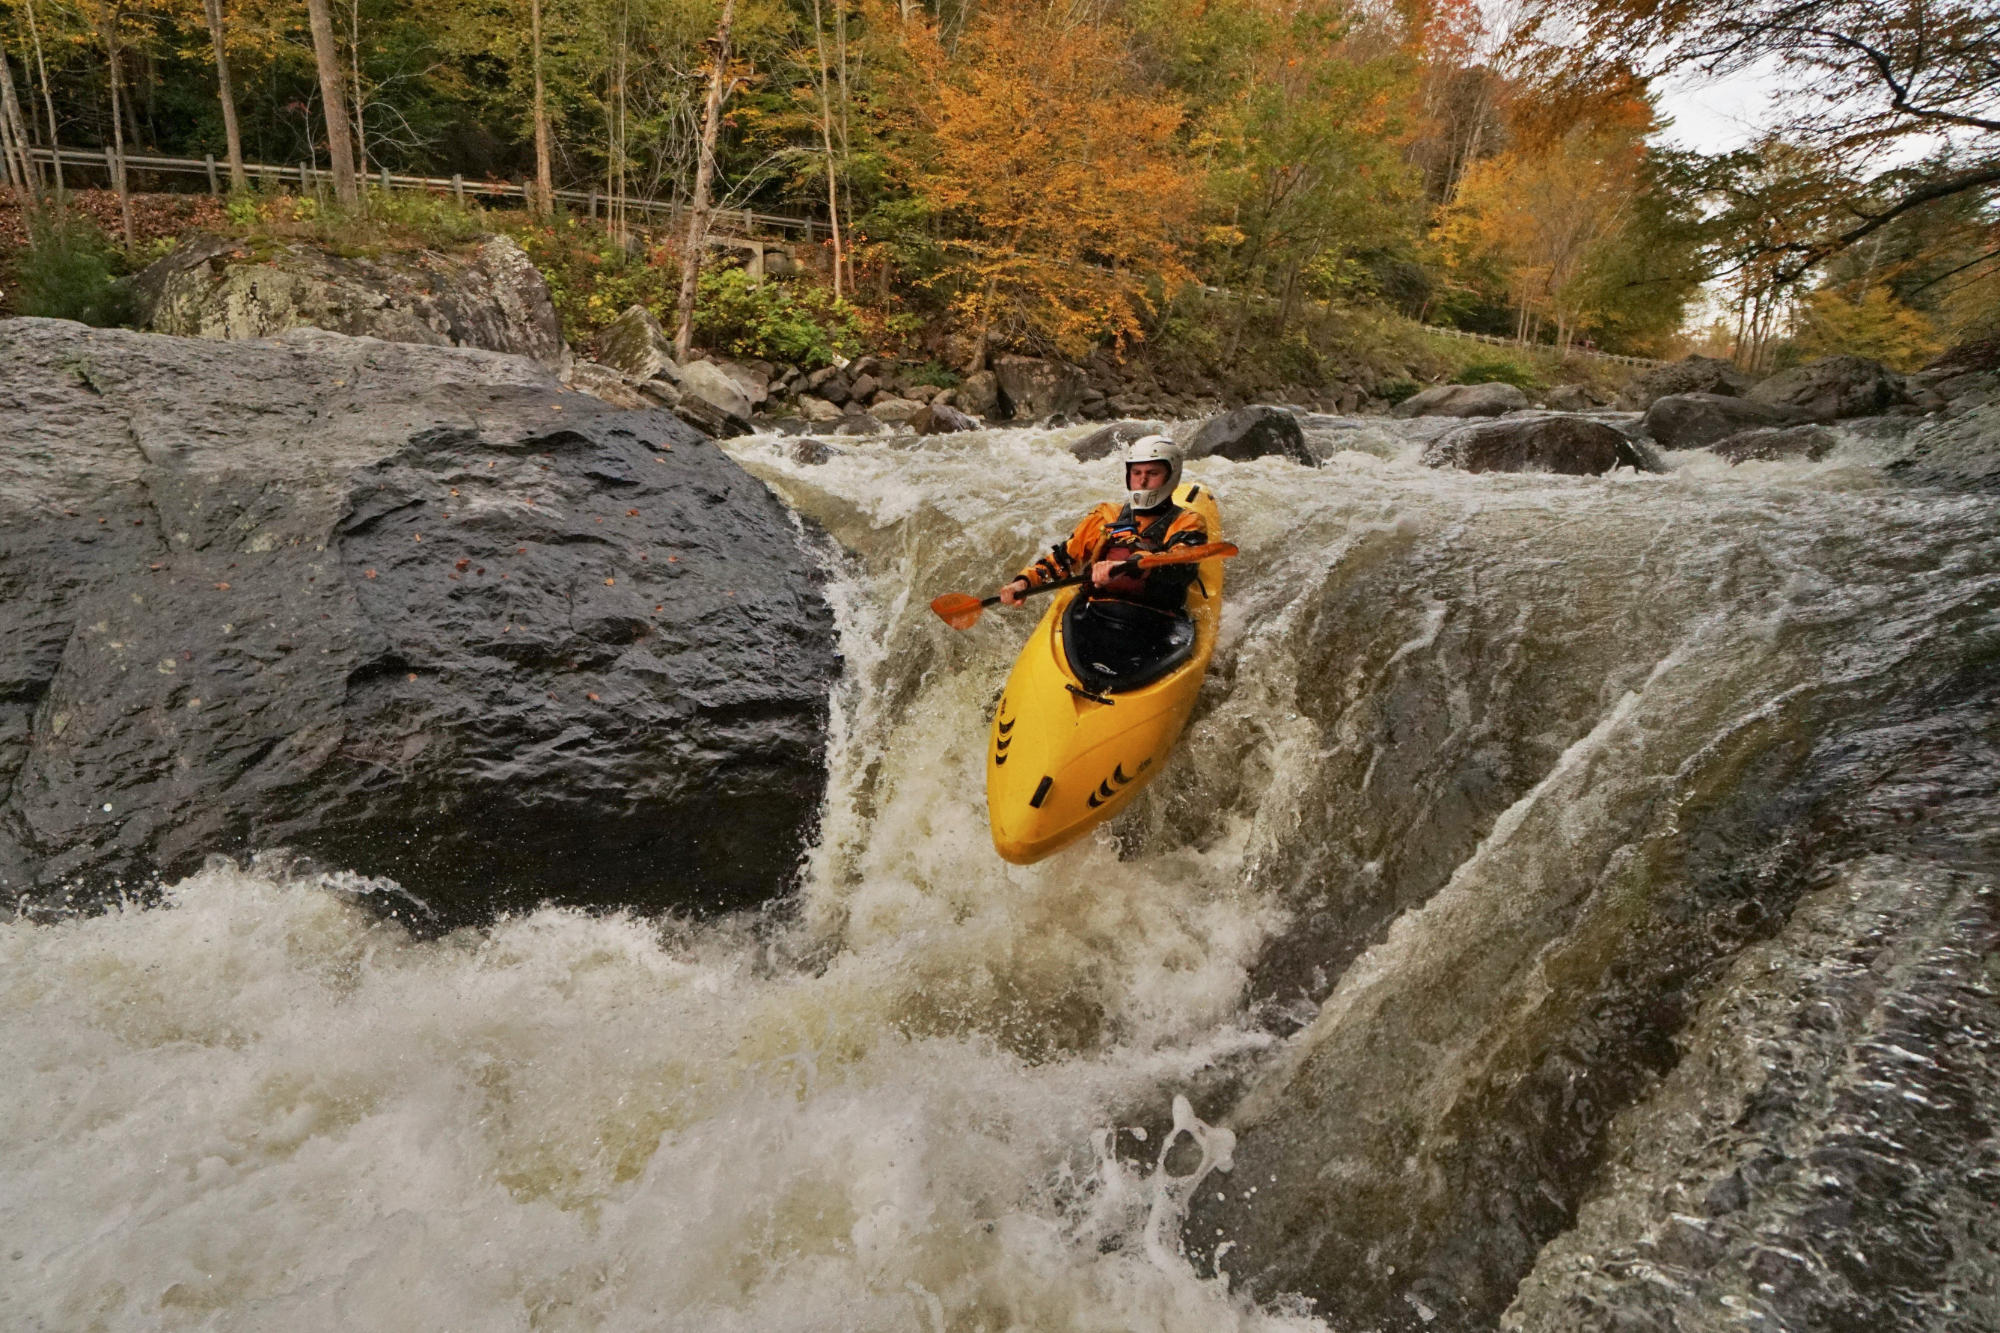 Clay Murphy runs Secret Compartment Rapid on the New Haven River Bristol Vermont Whitewater Kayaking